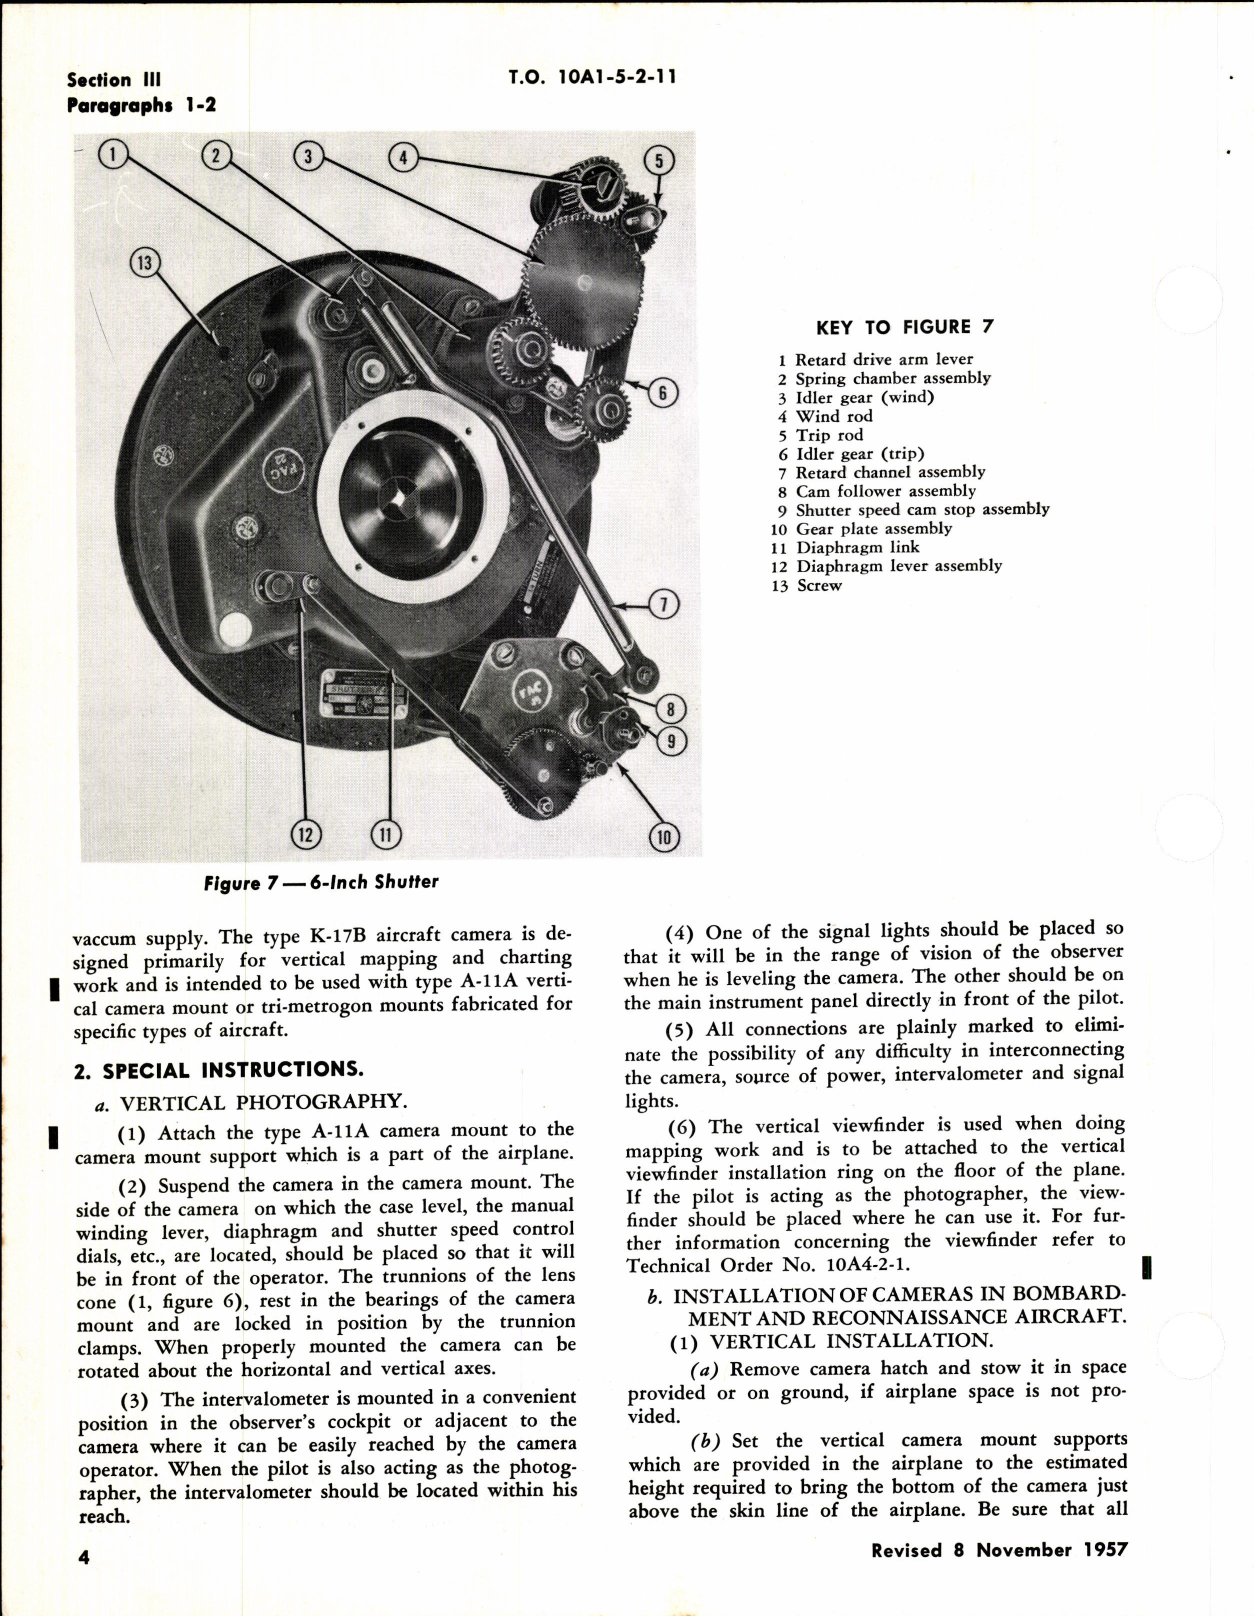 Sample page 6 from AirCorps Library document: Operation, Service, and Overhaul Instructions with Parts Catalog for Aircraft Camera Type K-17B 